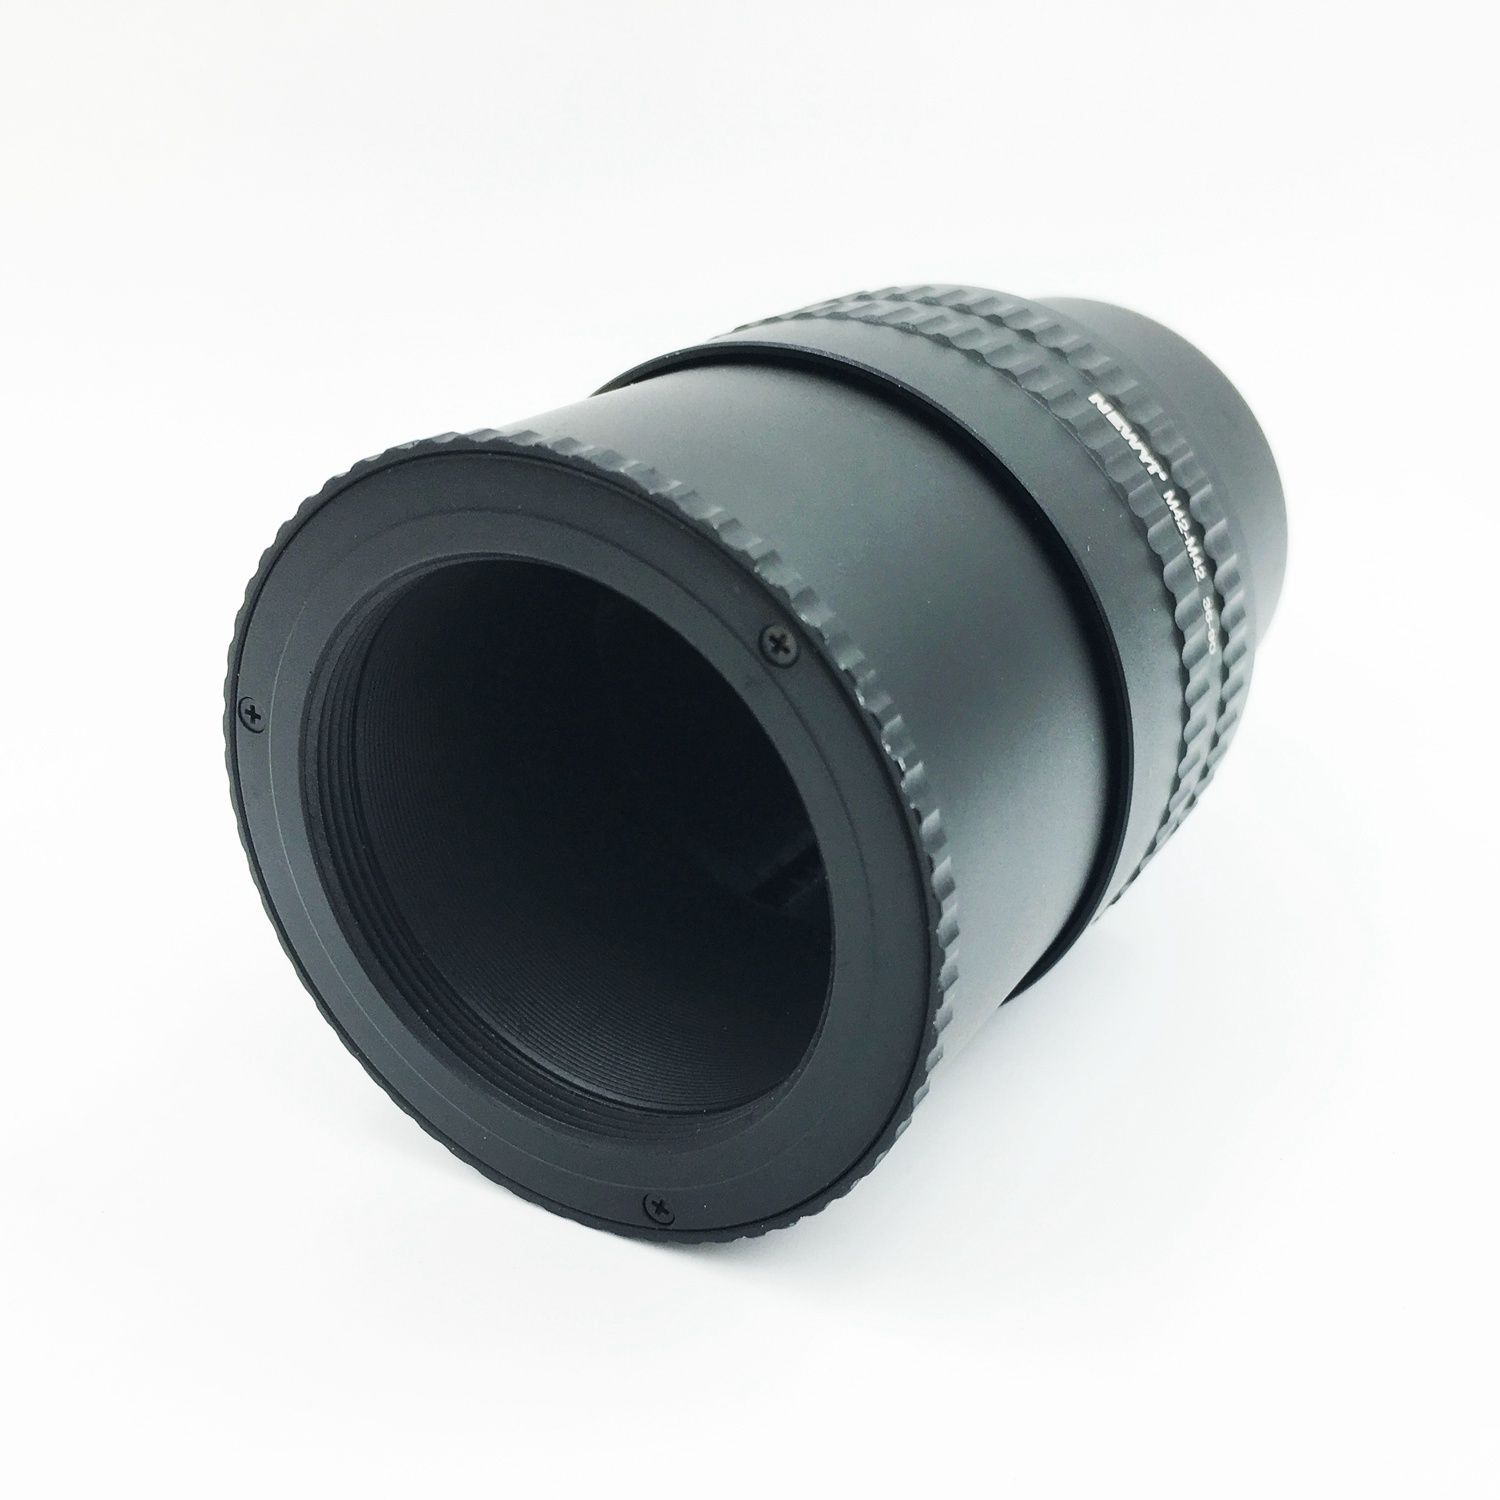 NEWYI-M42-M42-Mount-Lens-Adjustable-Focusing-Helicoid-36-90Mm-Macro-Extension-Adapter-Tube-Ring-1544859